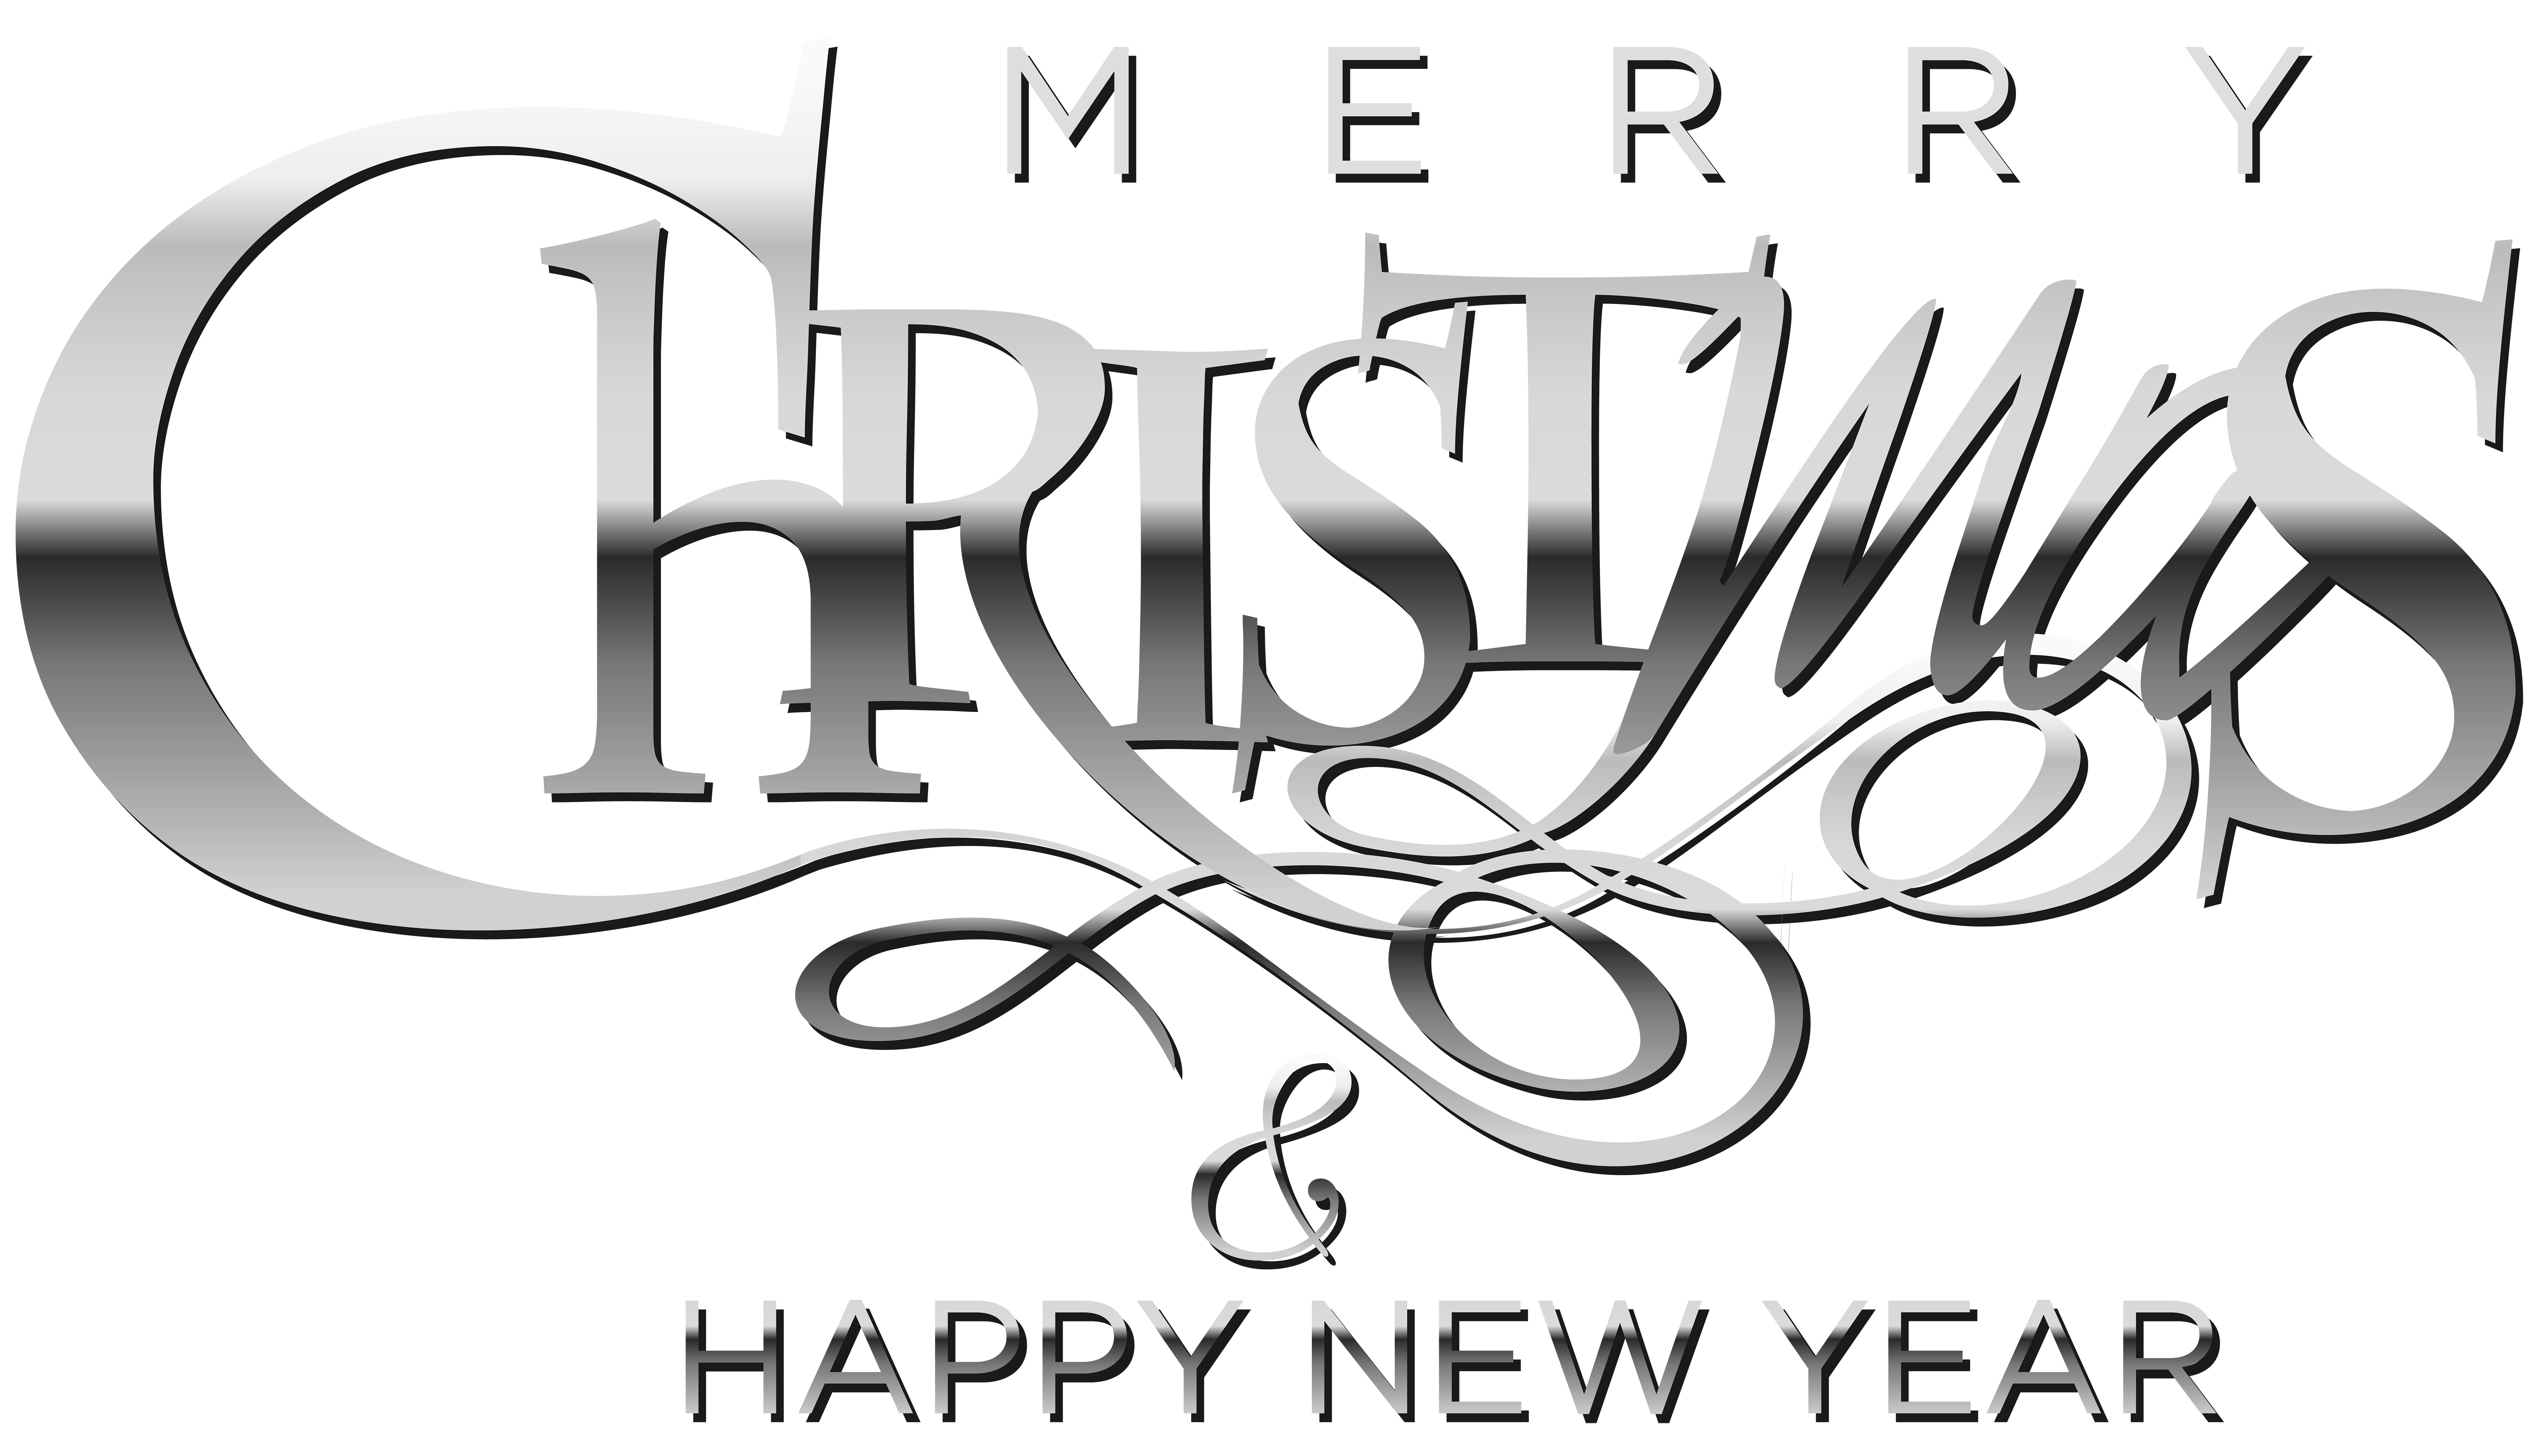 christian merry christmas and happy new year clip art